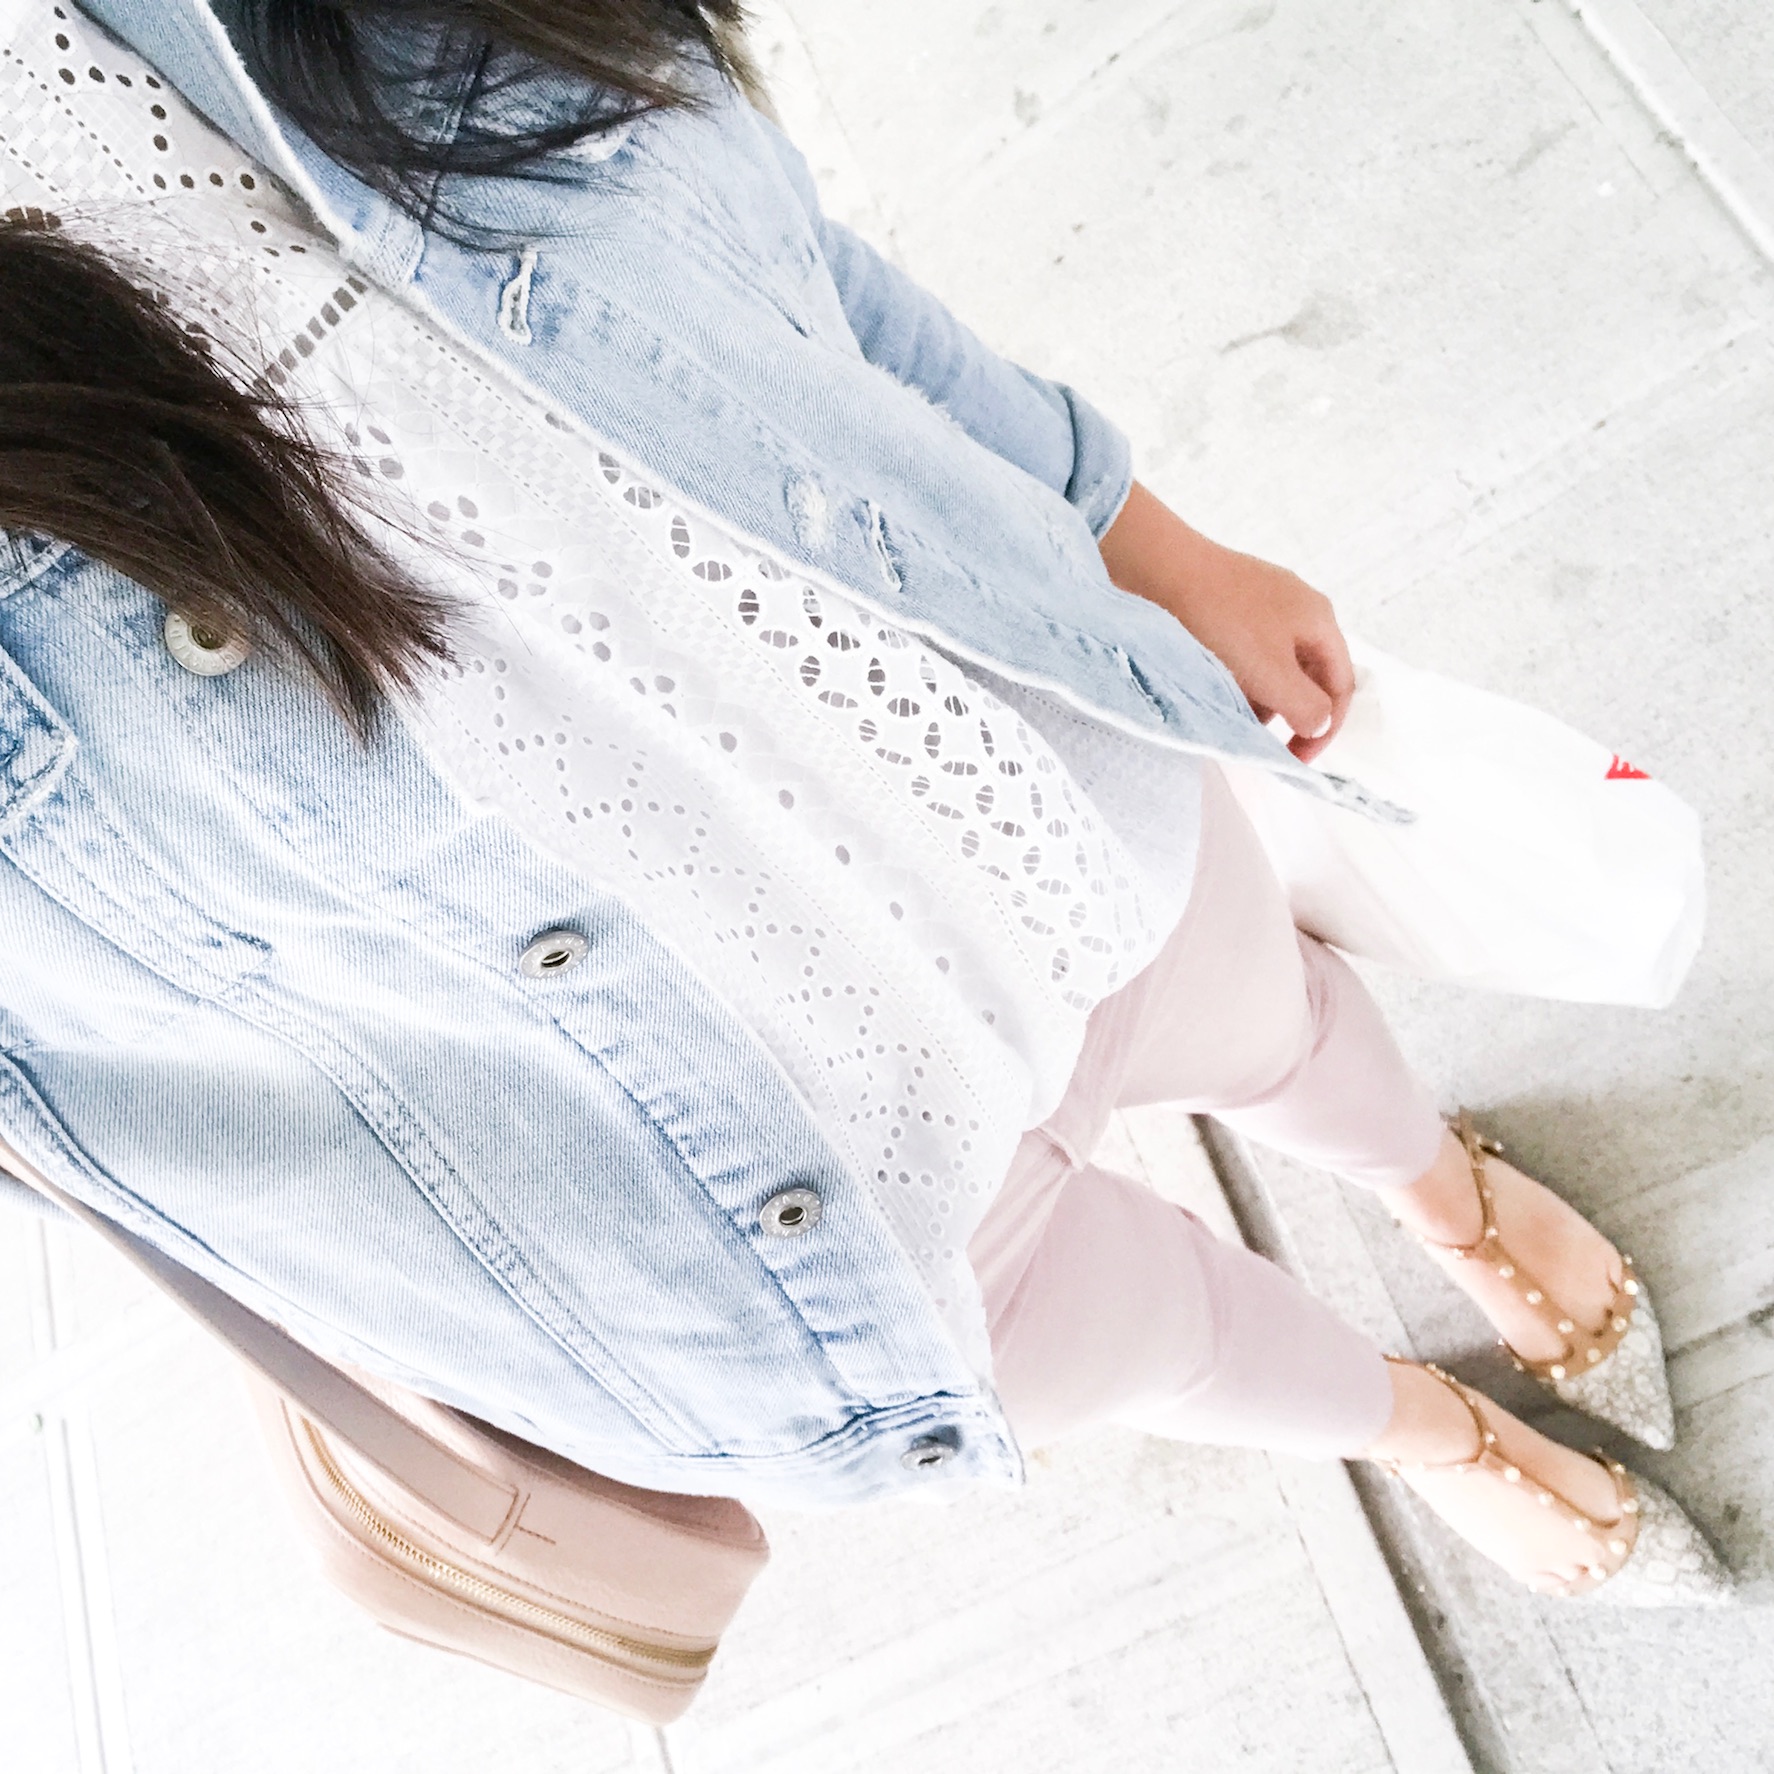 How to wear a denim jacket, eyelet top, blush jeans outfit, Seattle fashion blogger, petite blogger